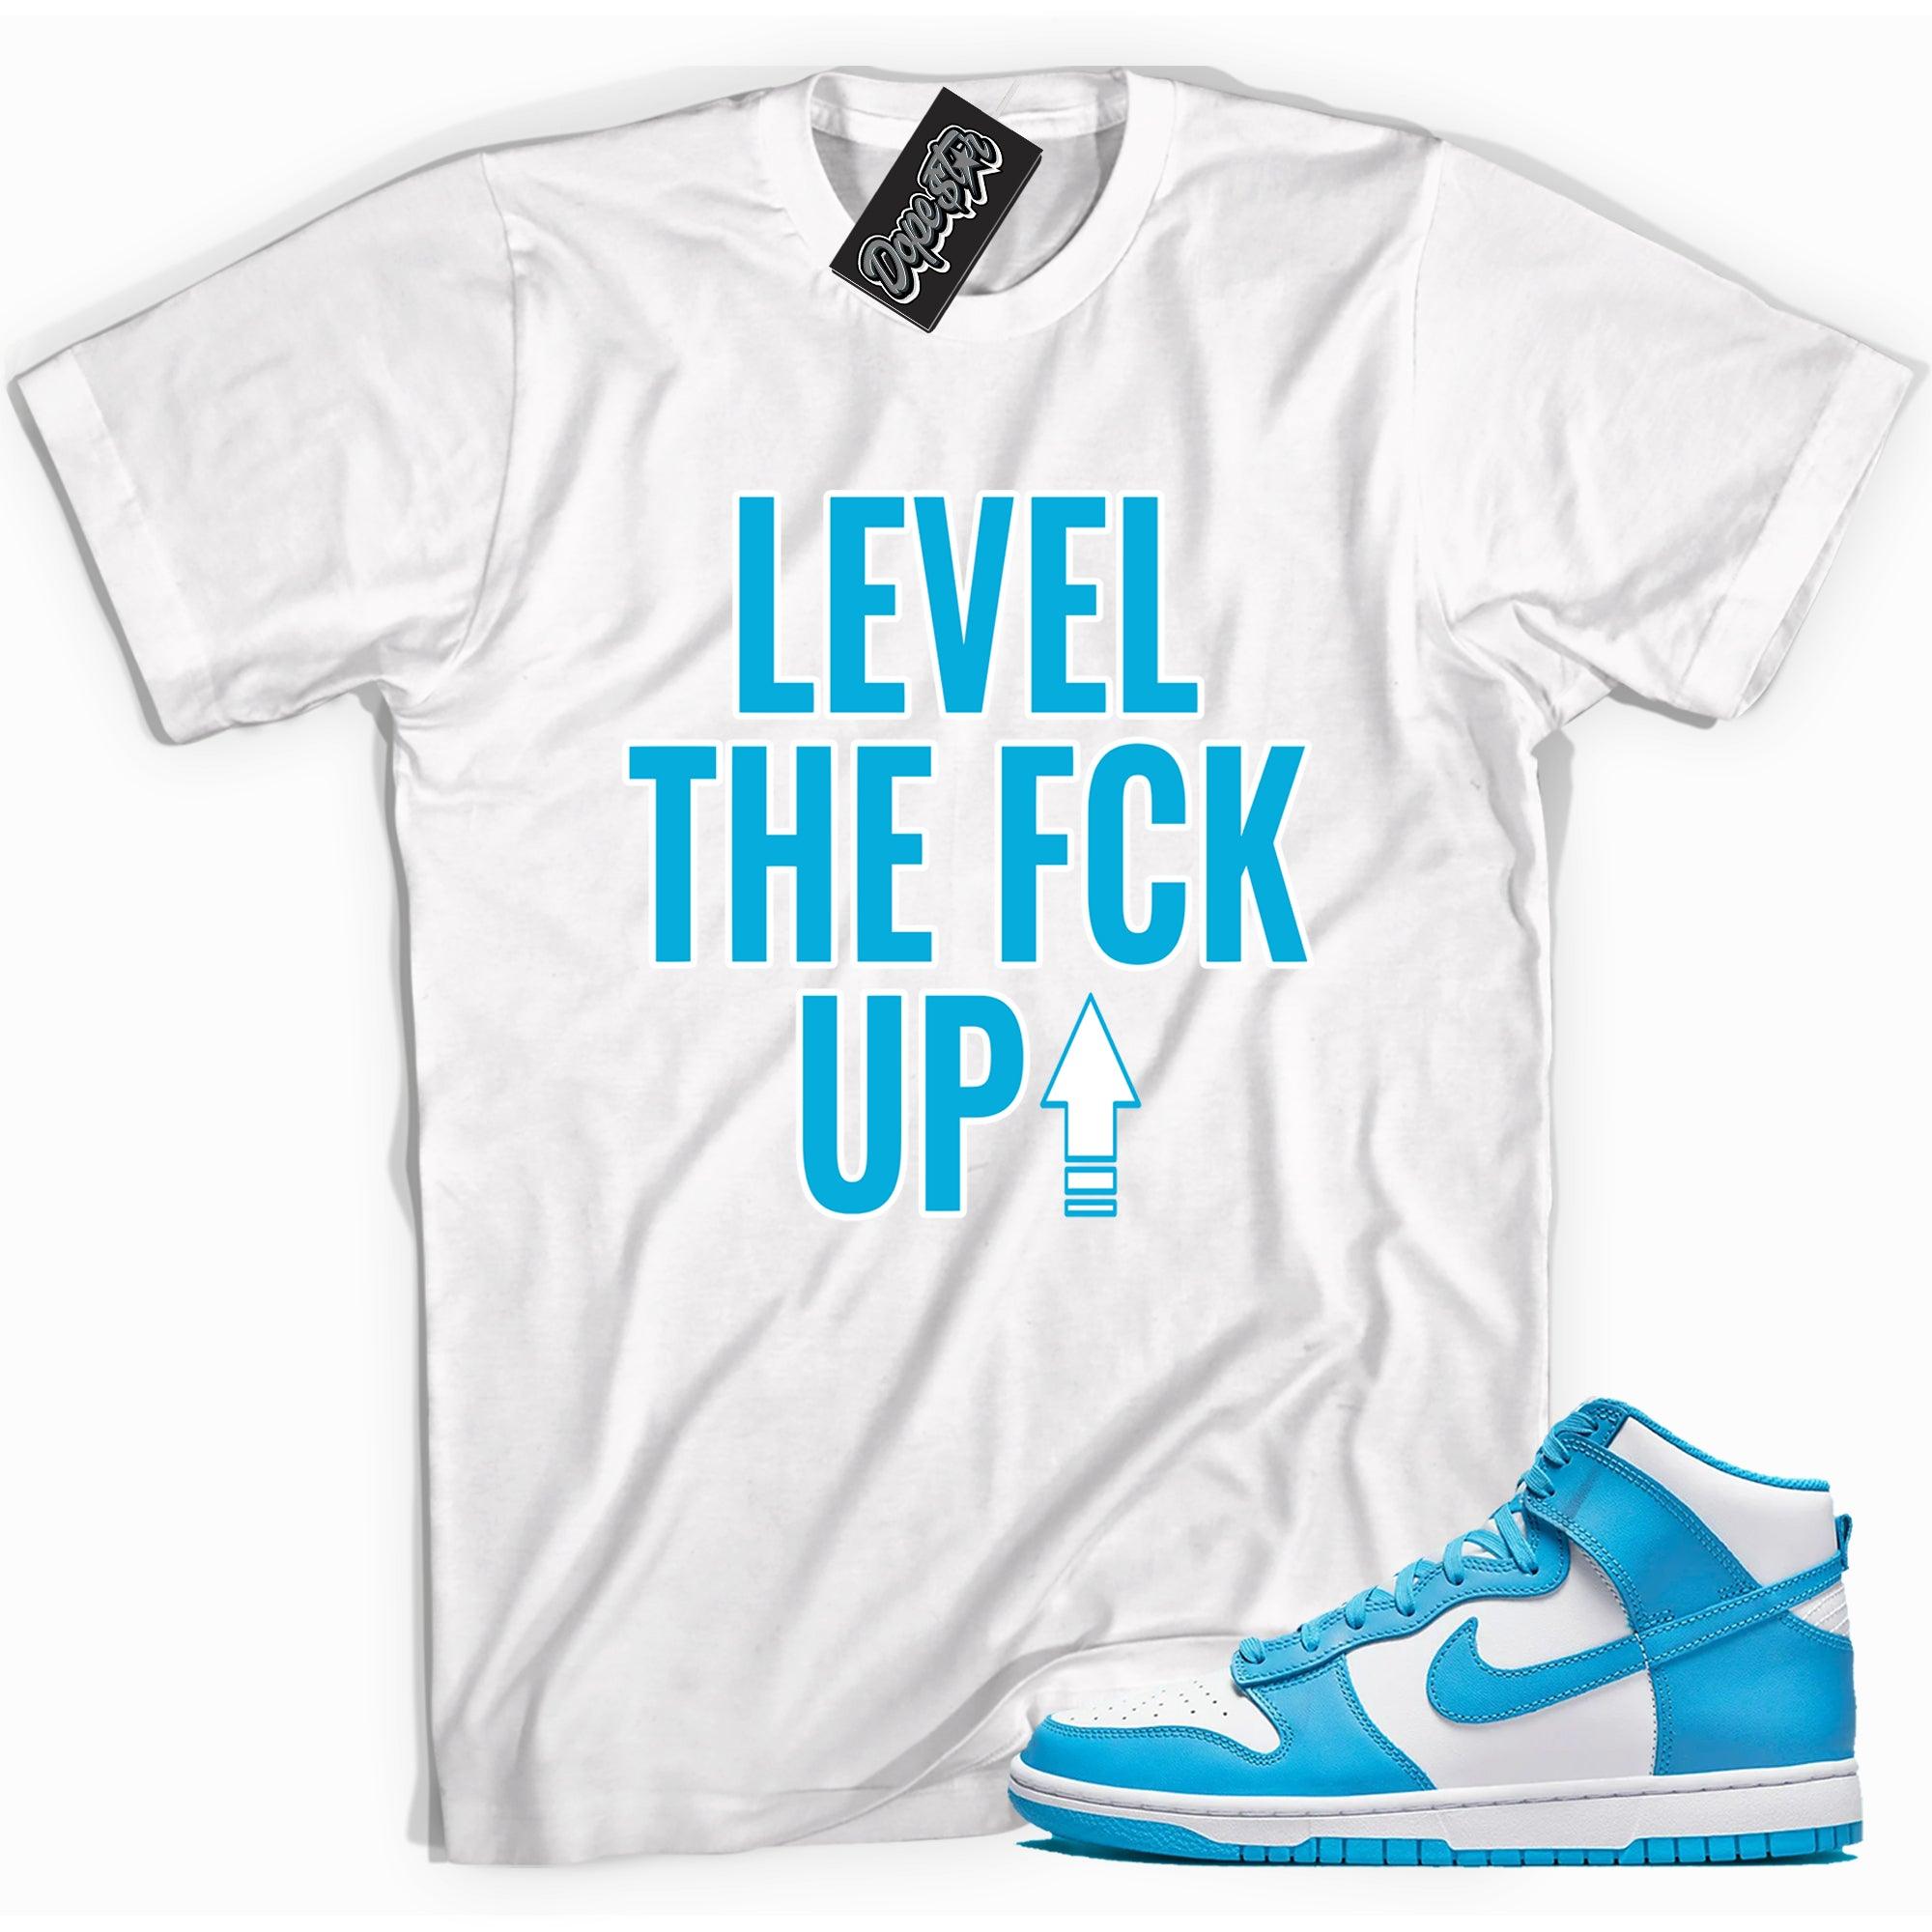 Cool white graphic tee with 'Level Up' print, that perfectly matches Nike Dunk High Retro Laser Blue sneakers.